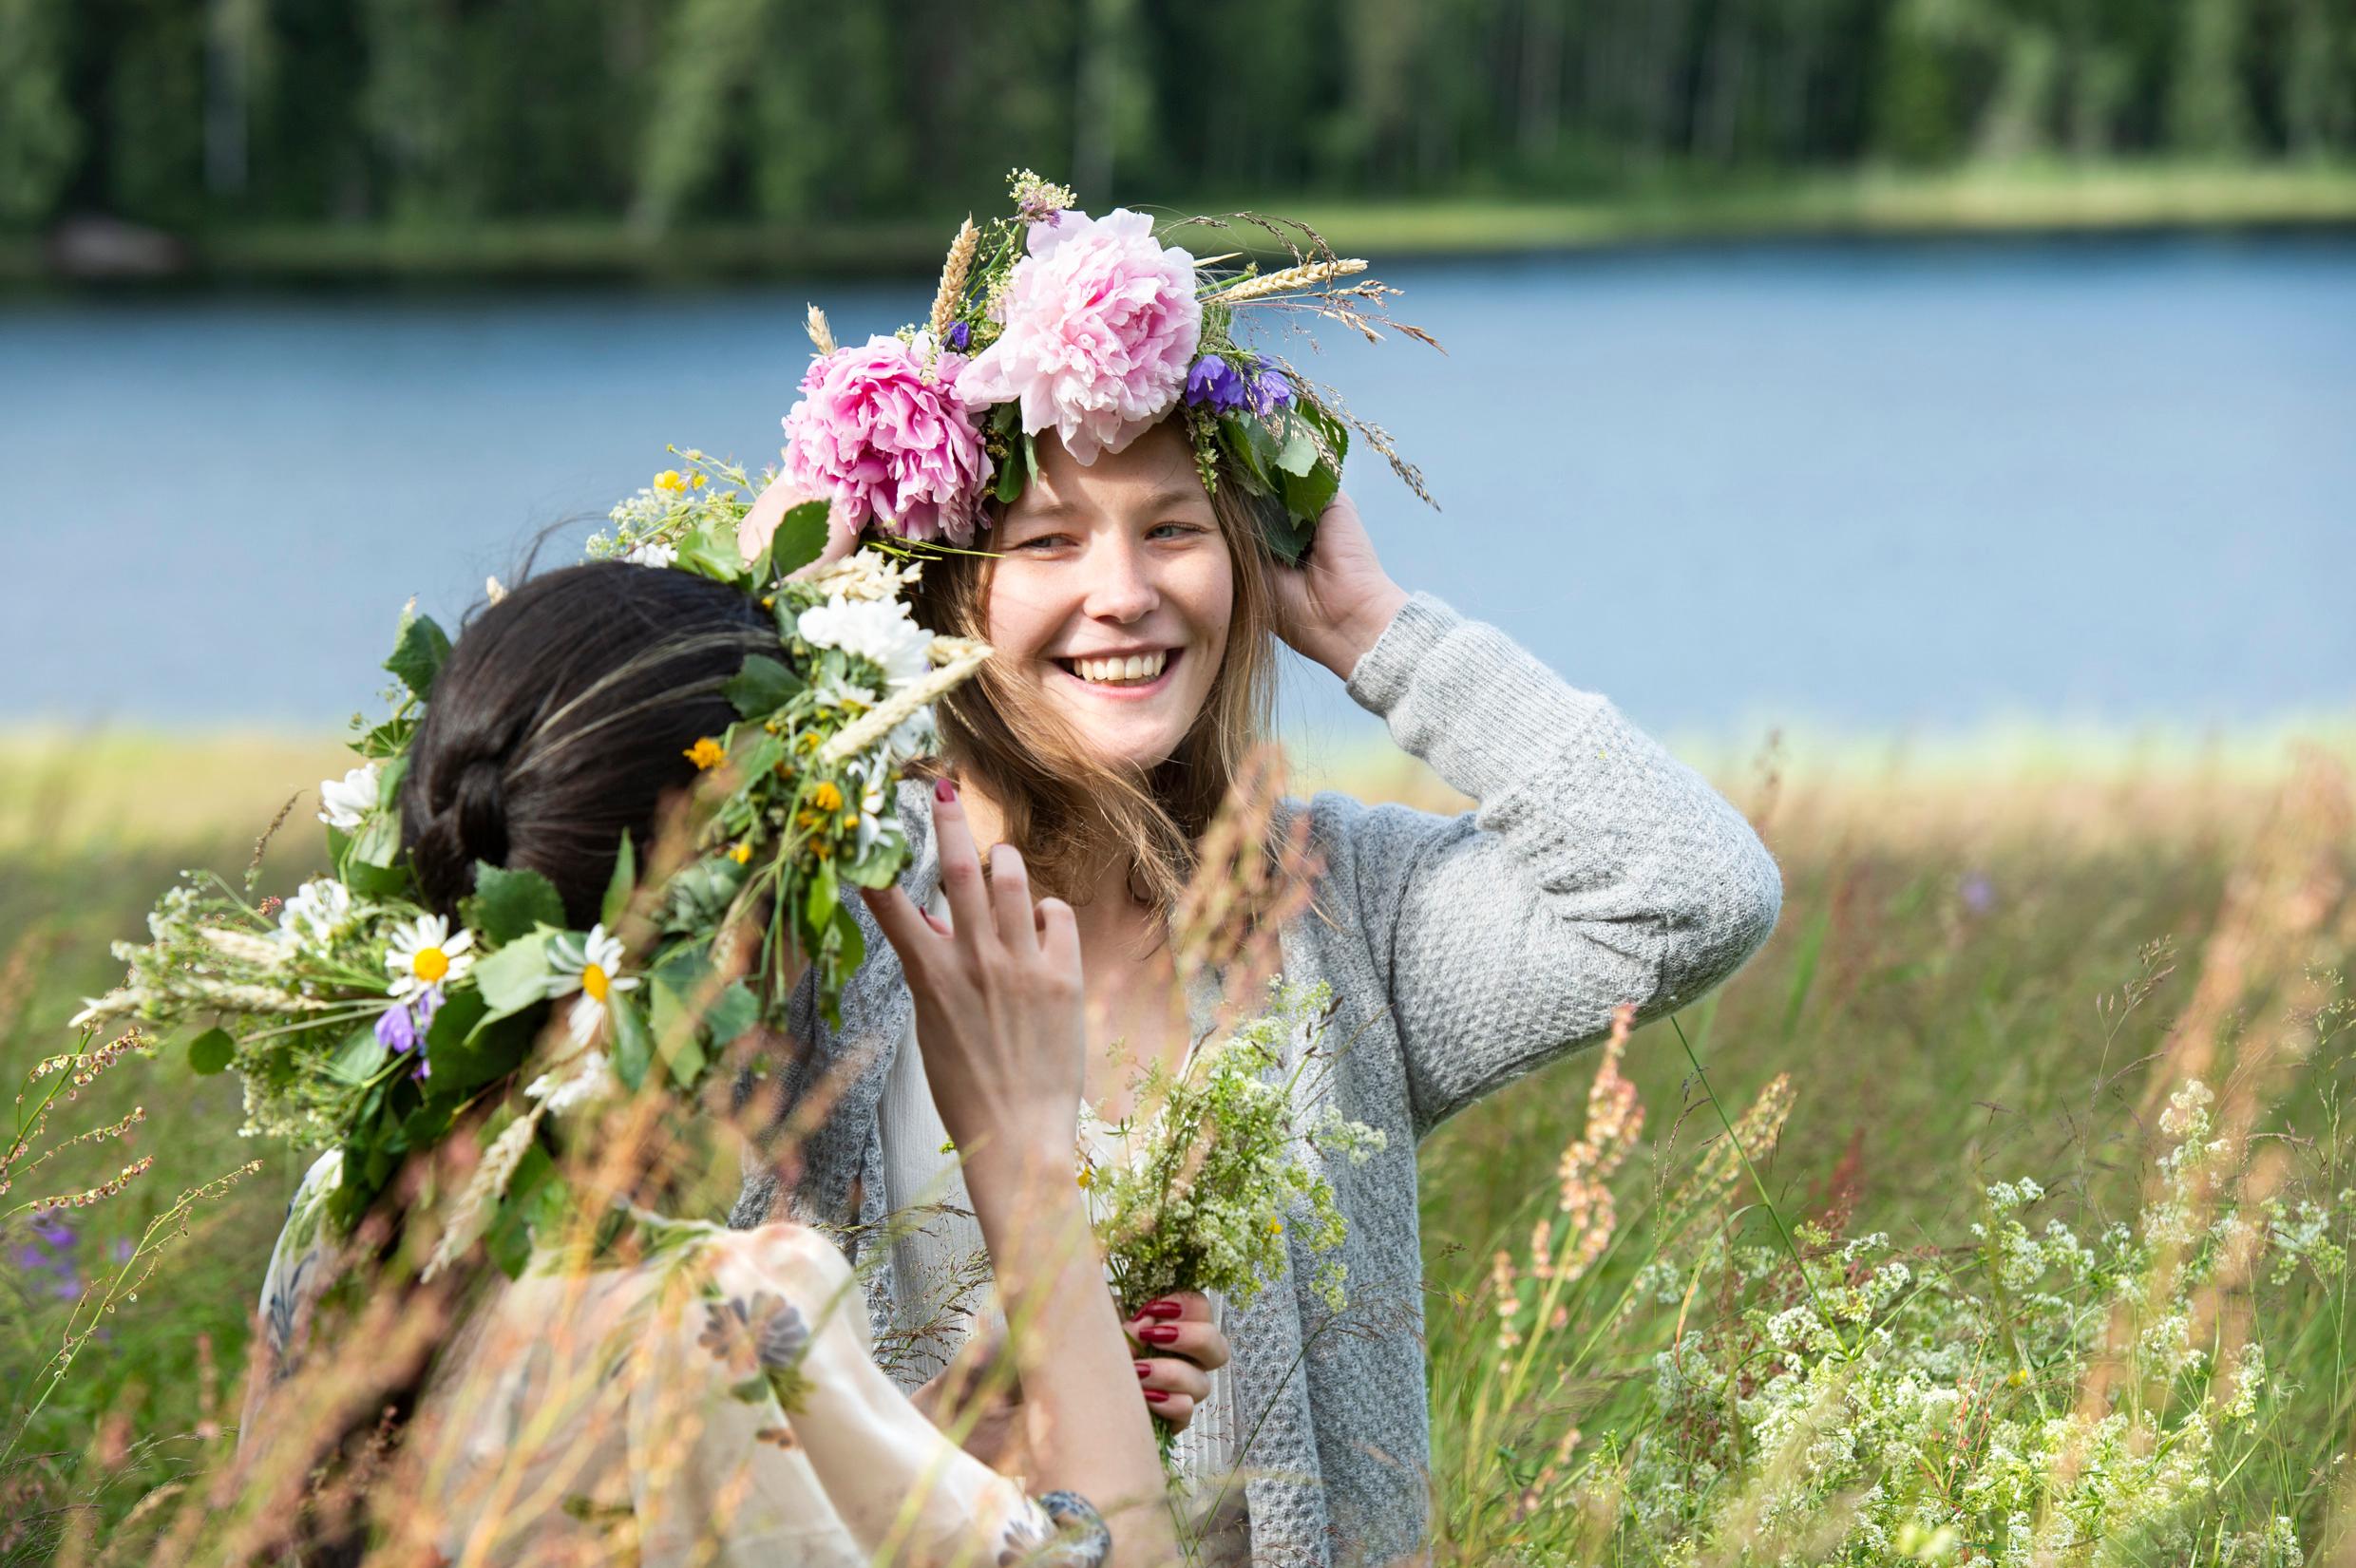 Two girls with flower wreaths on their heads. They're standing in a meadow, grass and water in the background.